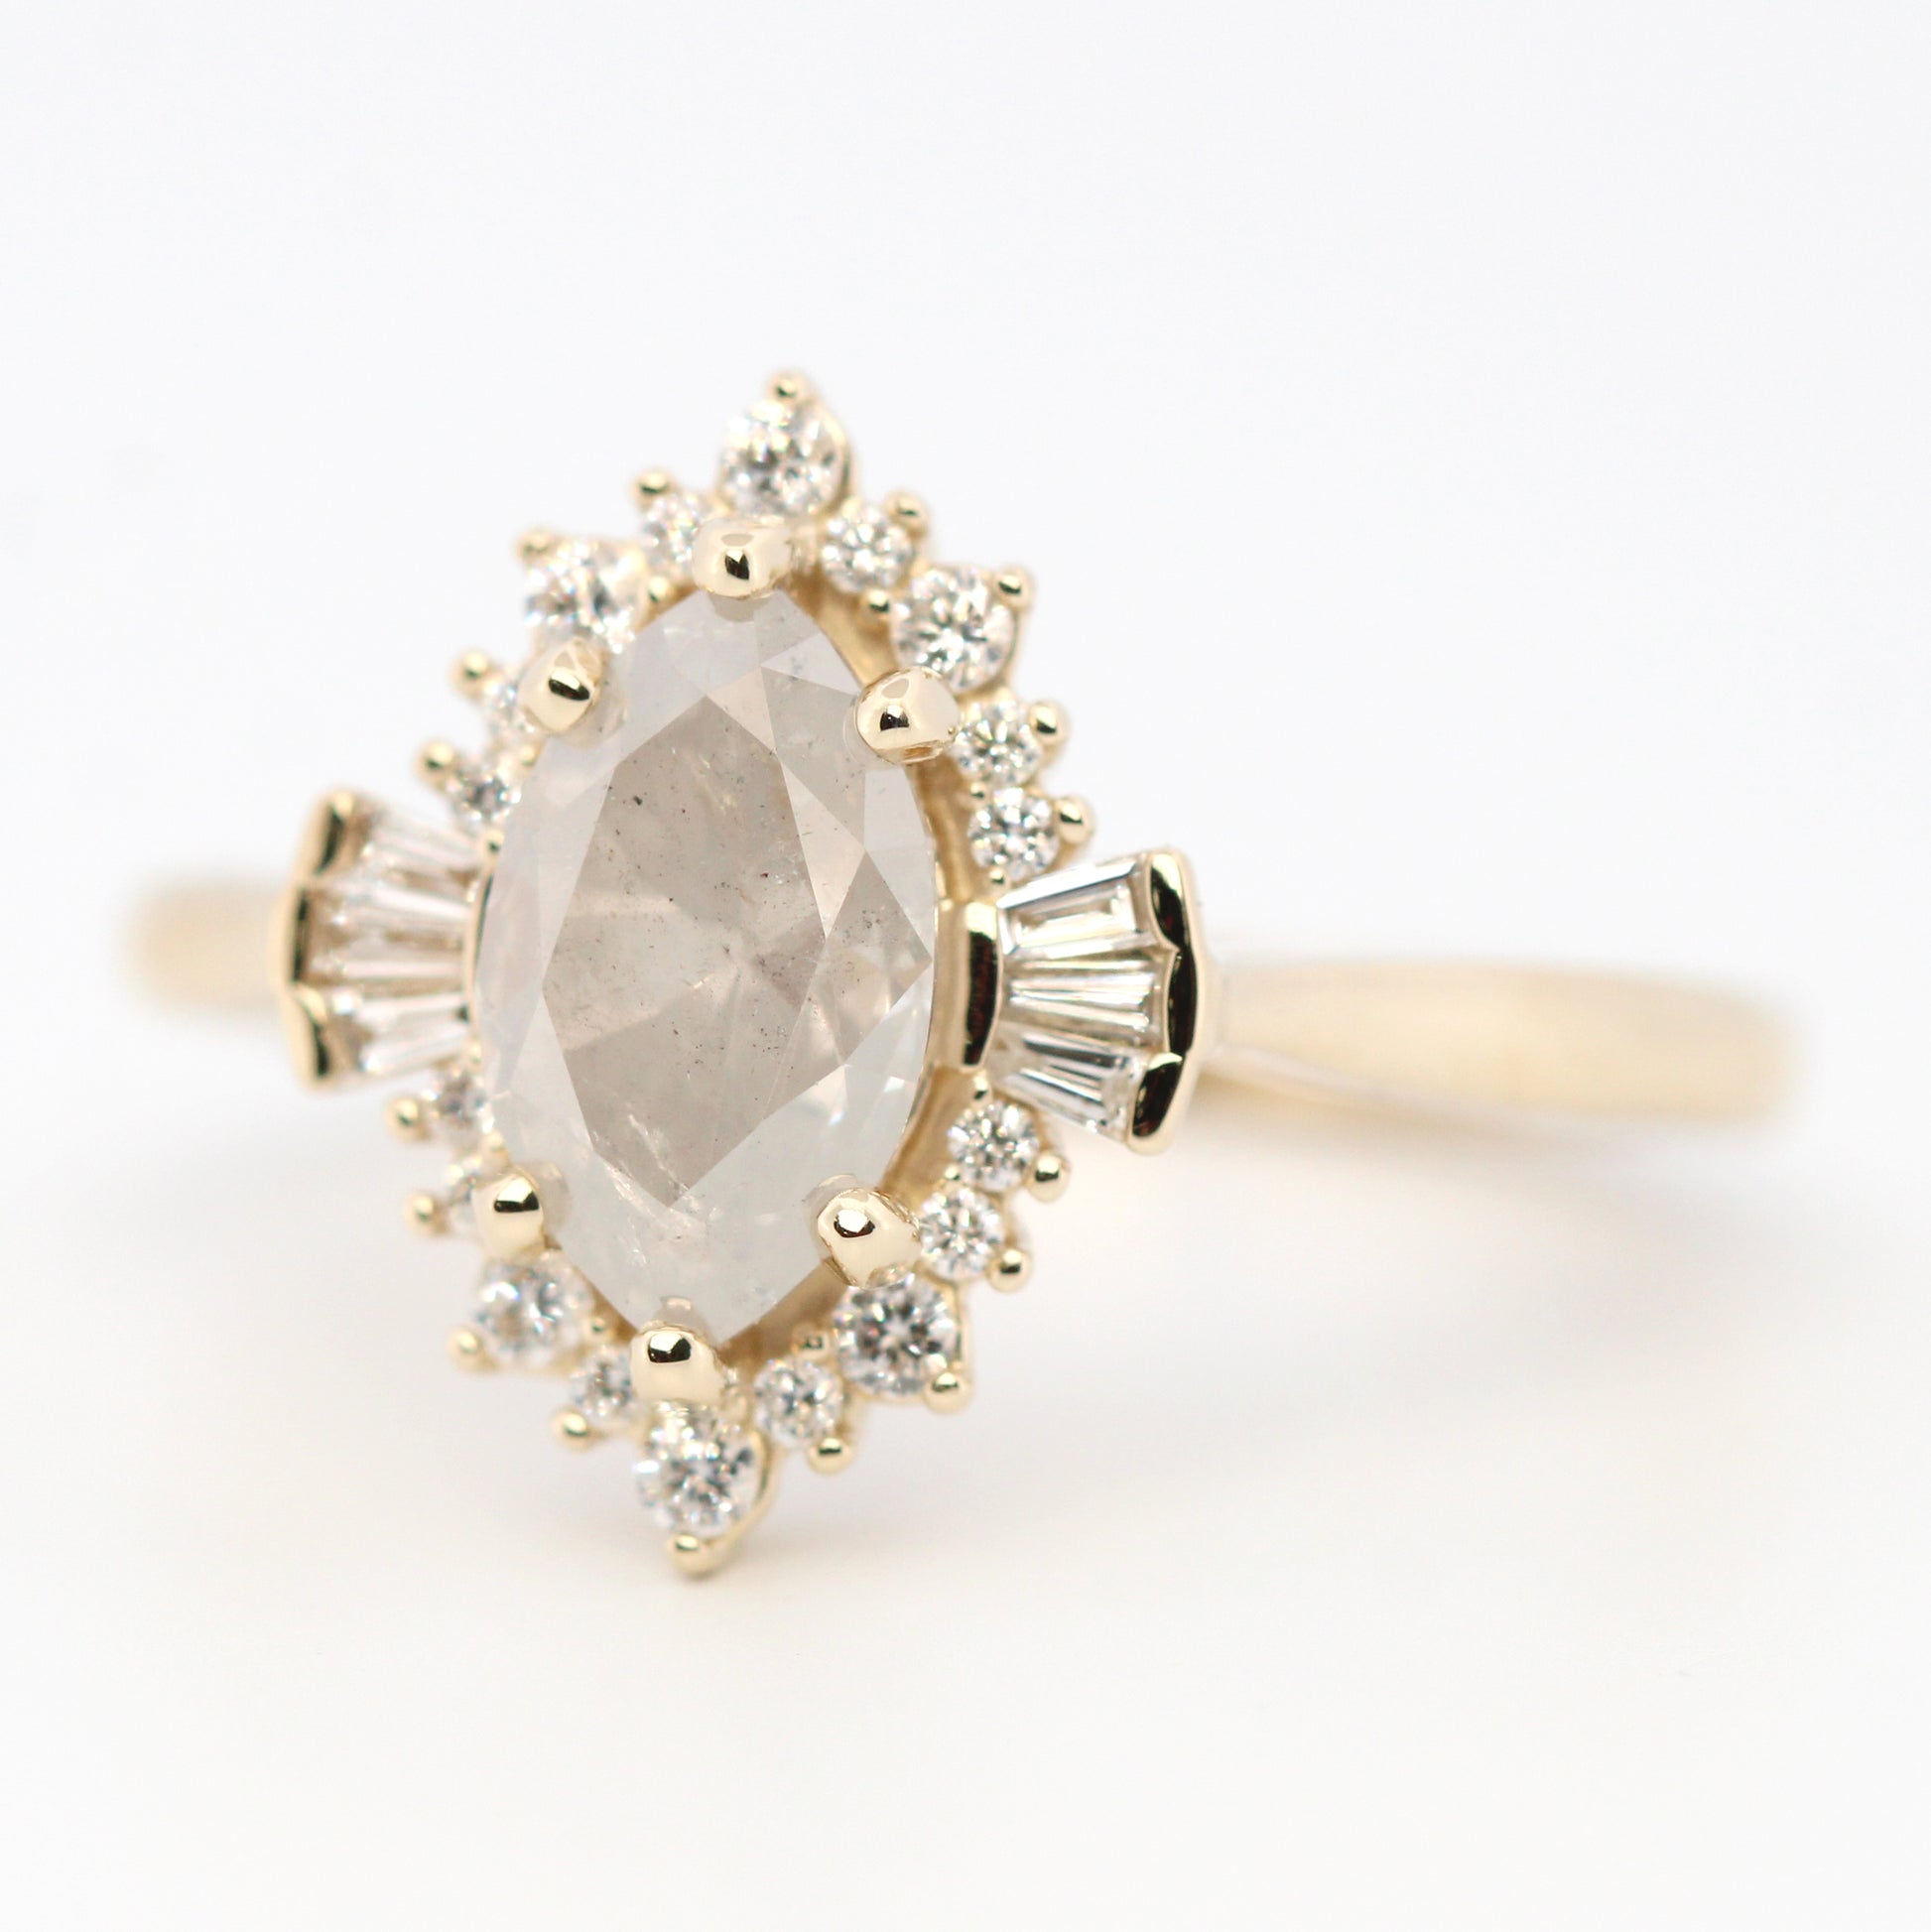 Meghan Ring with a 1.40 Carat Misty Gray Marquise Celestial Diamond and White Accent Diamonds in 14k Yellow Gold - Ready to Size and Ship - Midwinter Co. Alternative Bridal Rings and Modern Fine Jewelry